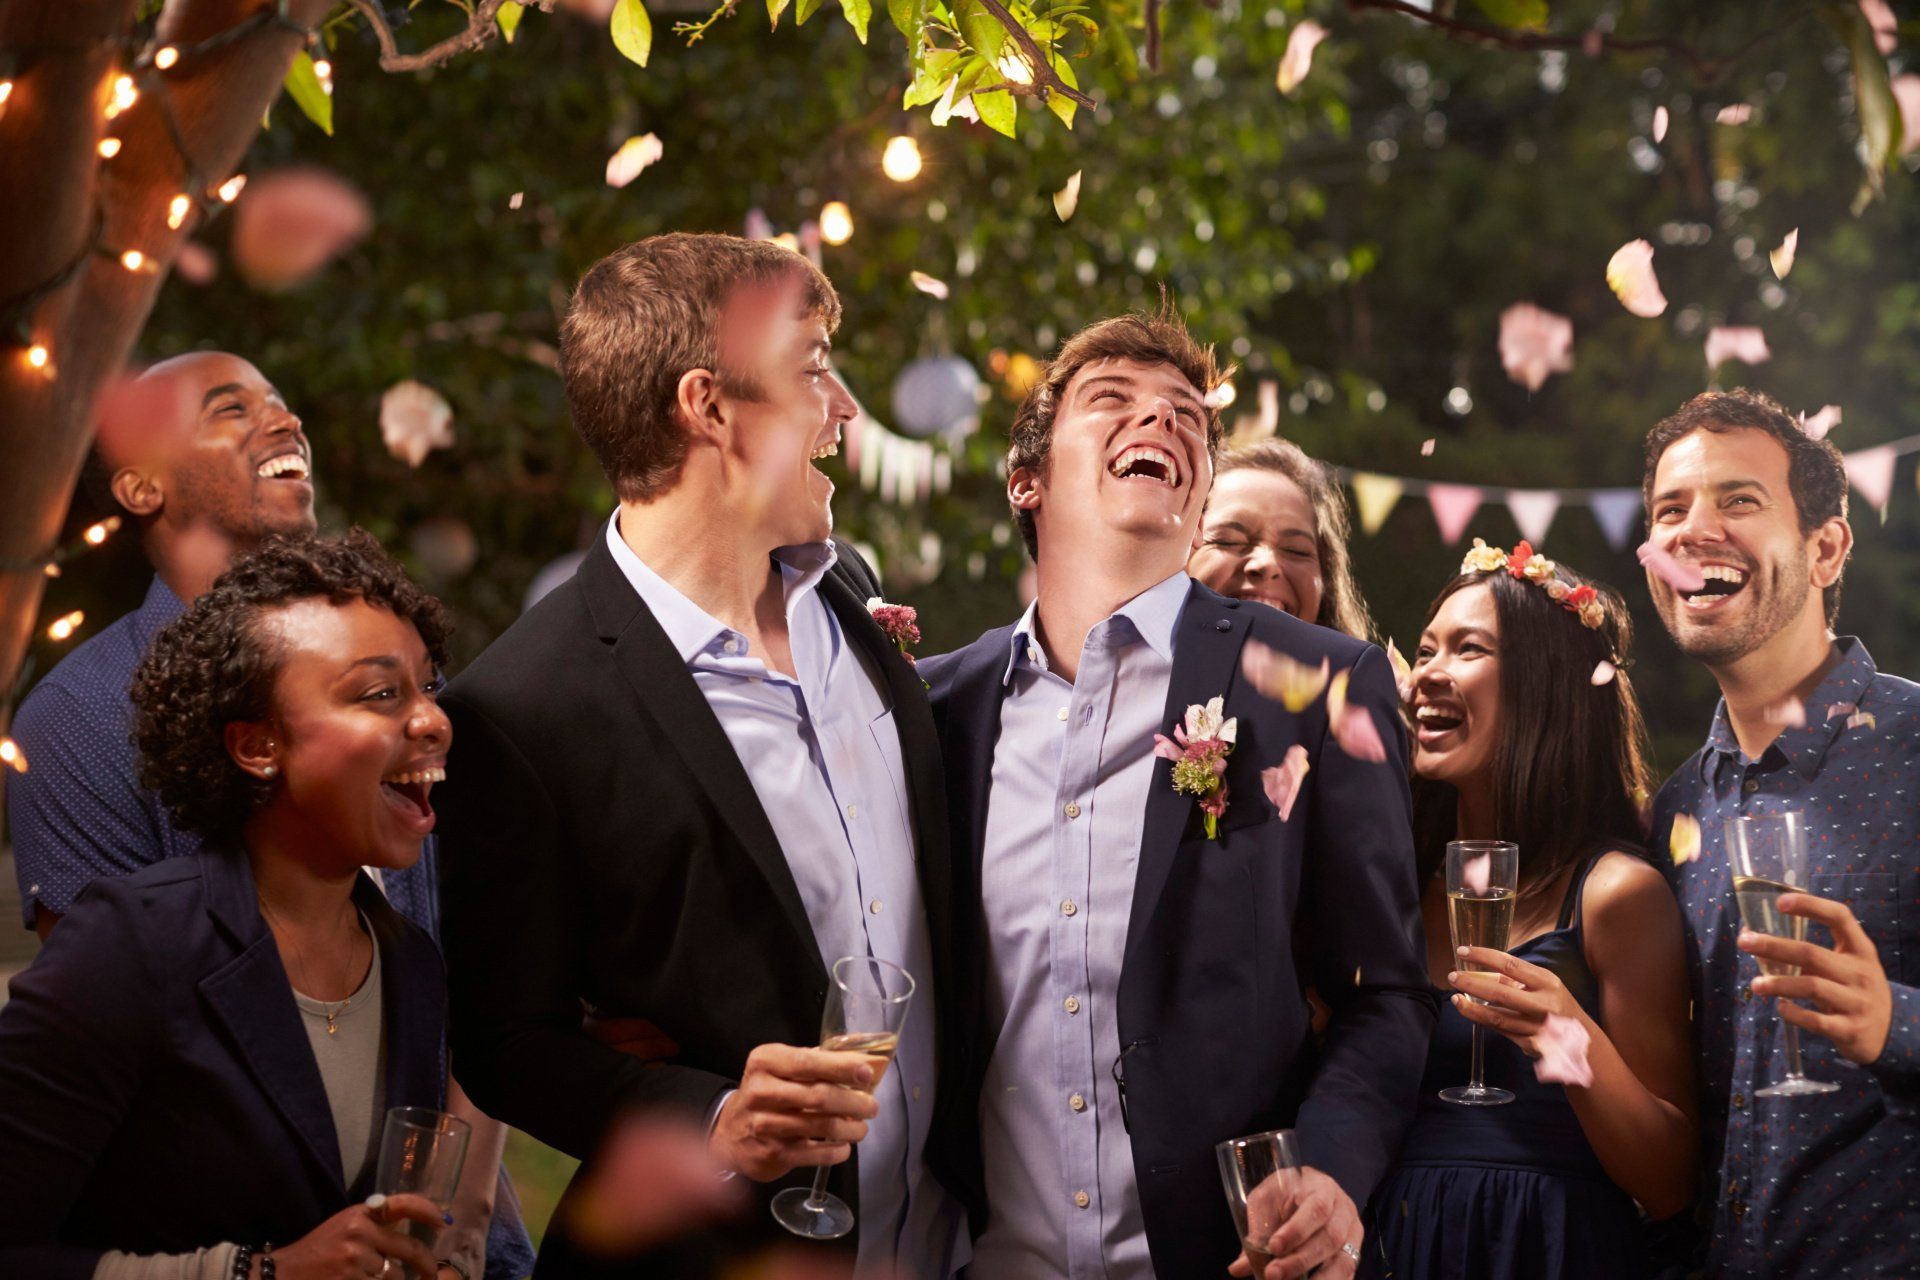 Groom and groom celebrating after their wedding ceremony laughing with and surrounded by their friends under falling rose petals.